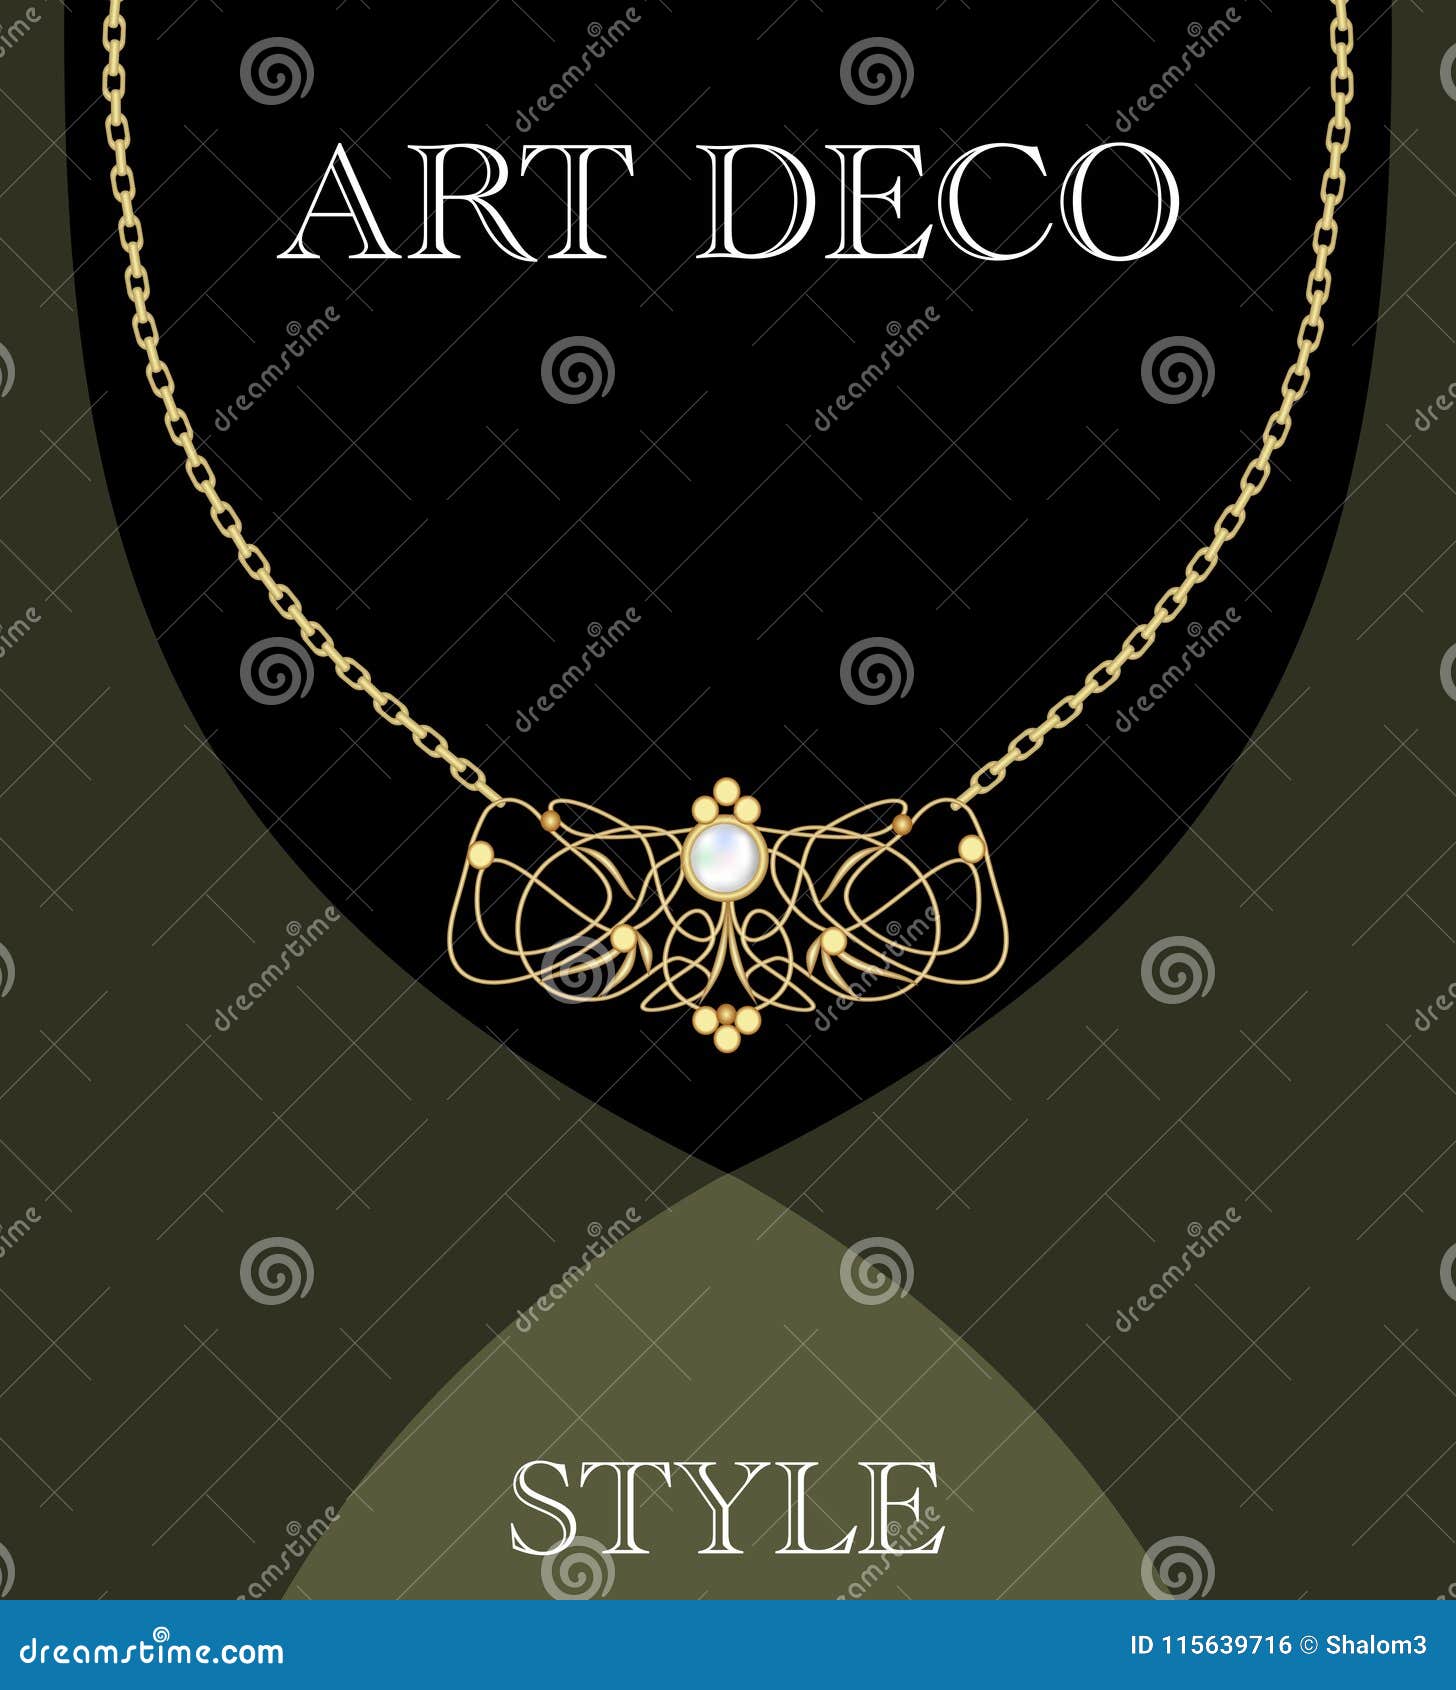 Art Deco Jewelry | Vintage Art Deco Rings, Necklaces, and Earrings